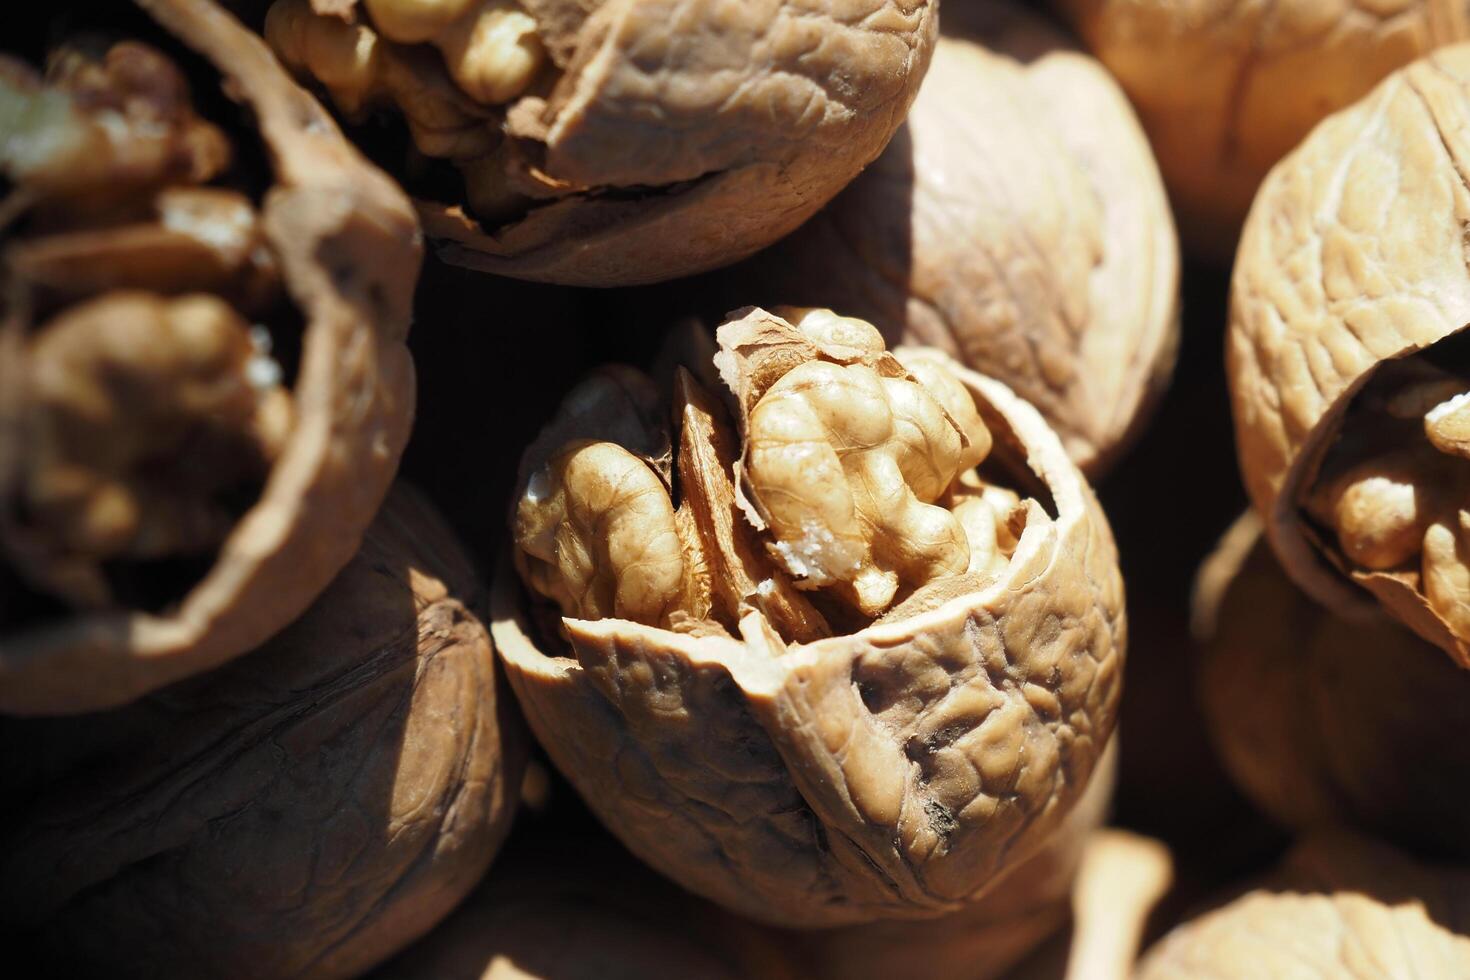 A scoop of walnuts, a superfood, rests on a stack of nuts seeds photo